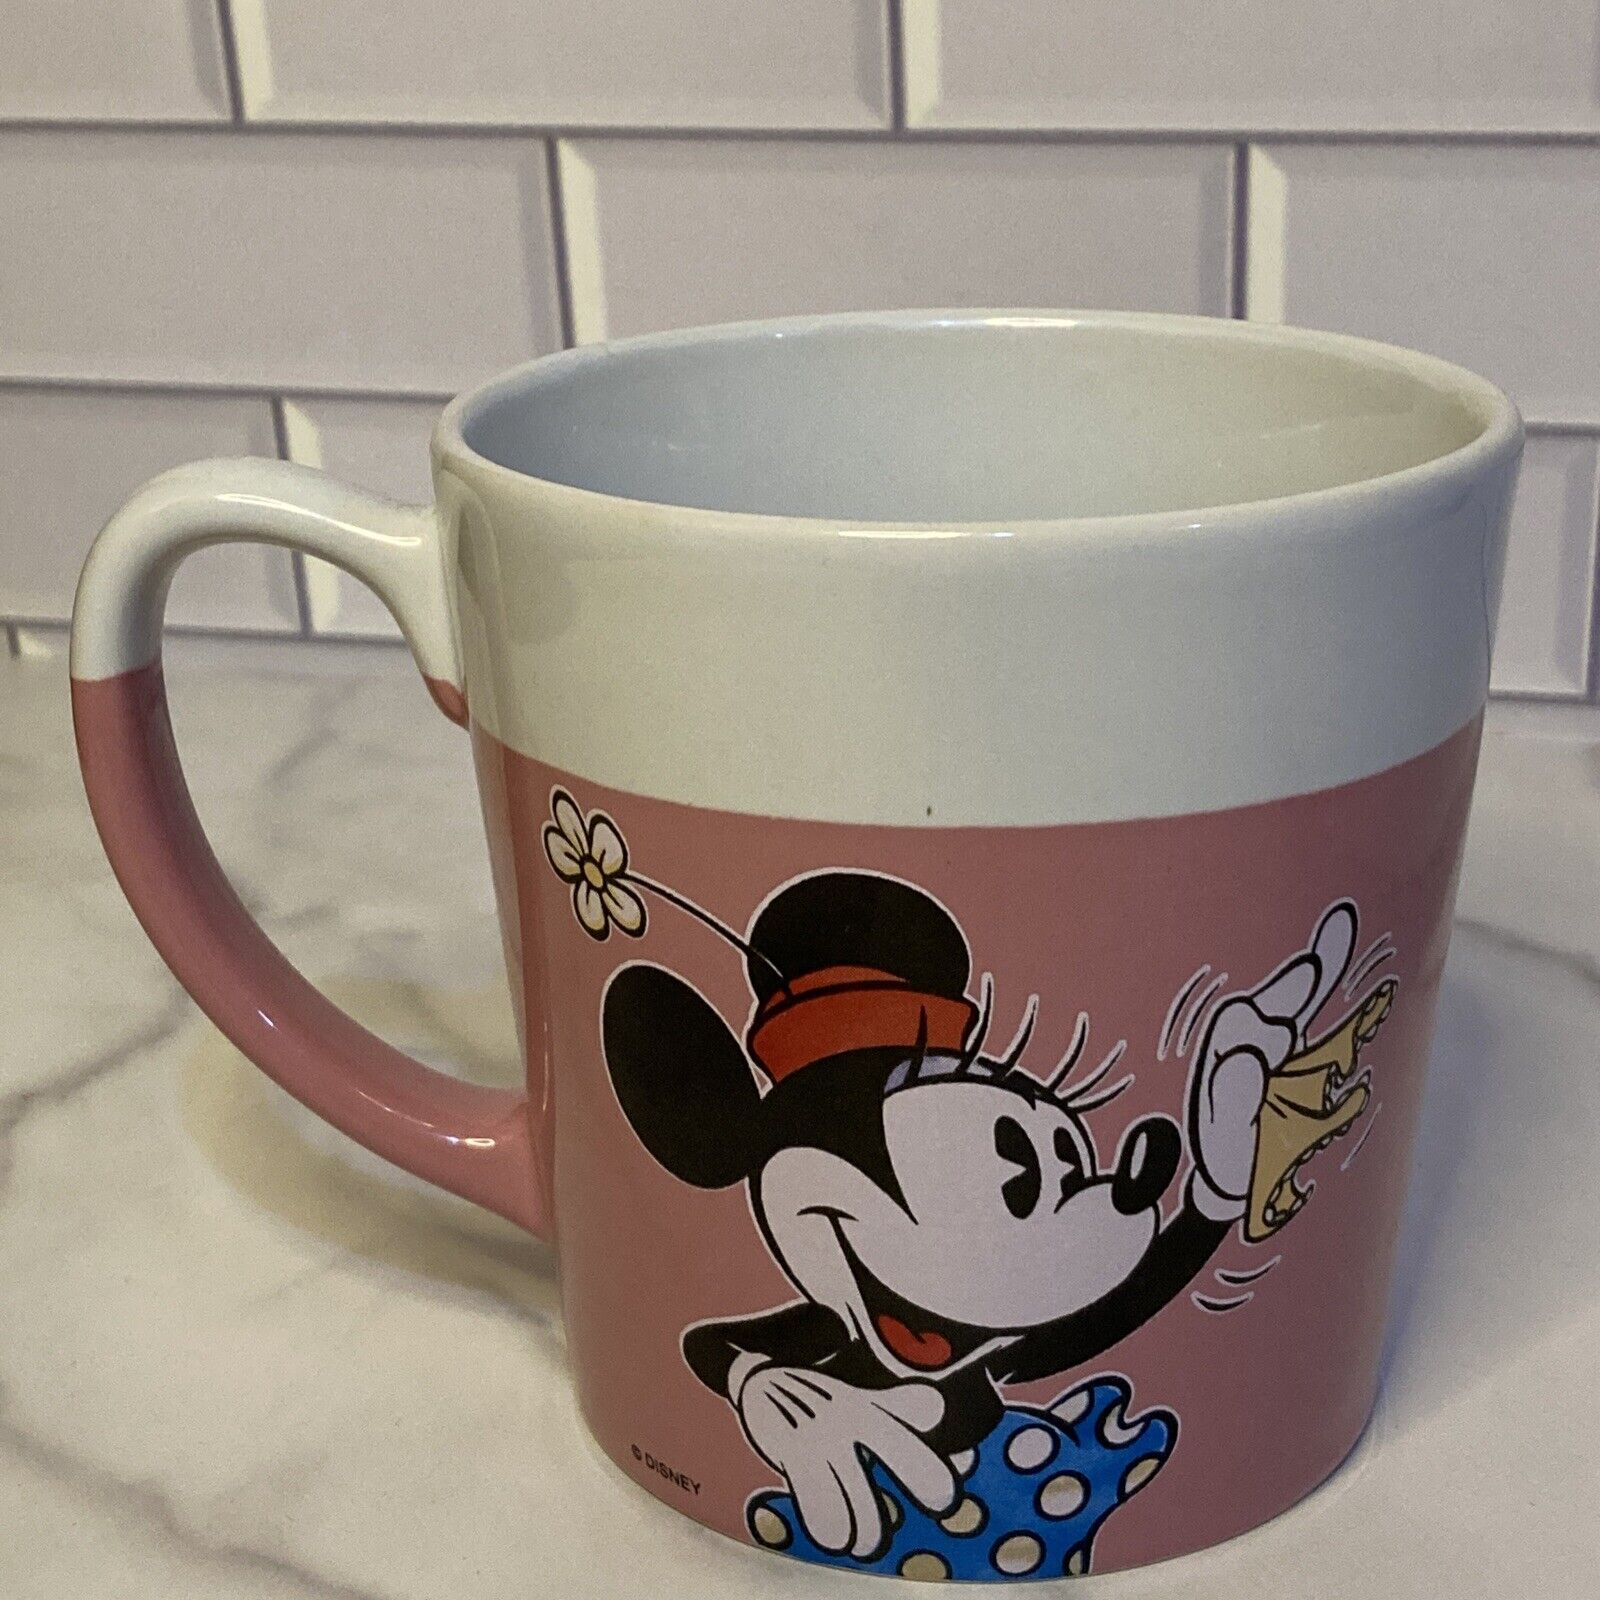 Disney Store Minnie Mouse Waving Mug Cup Pink & White Extra Large